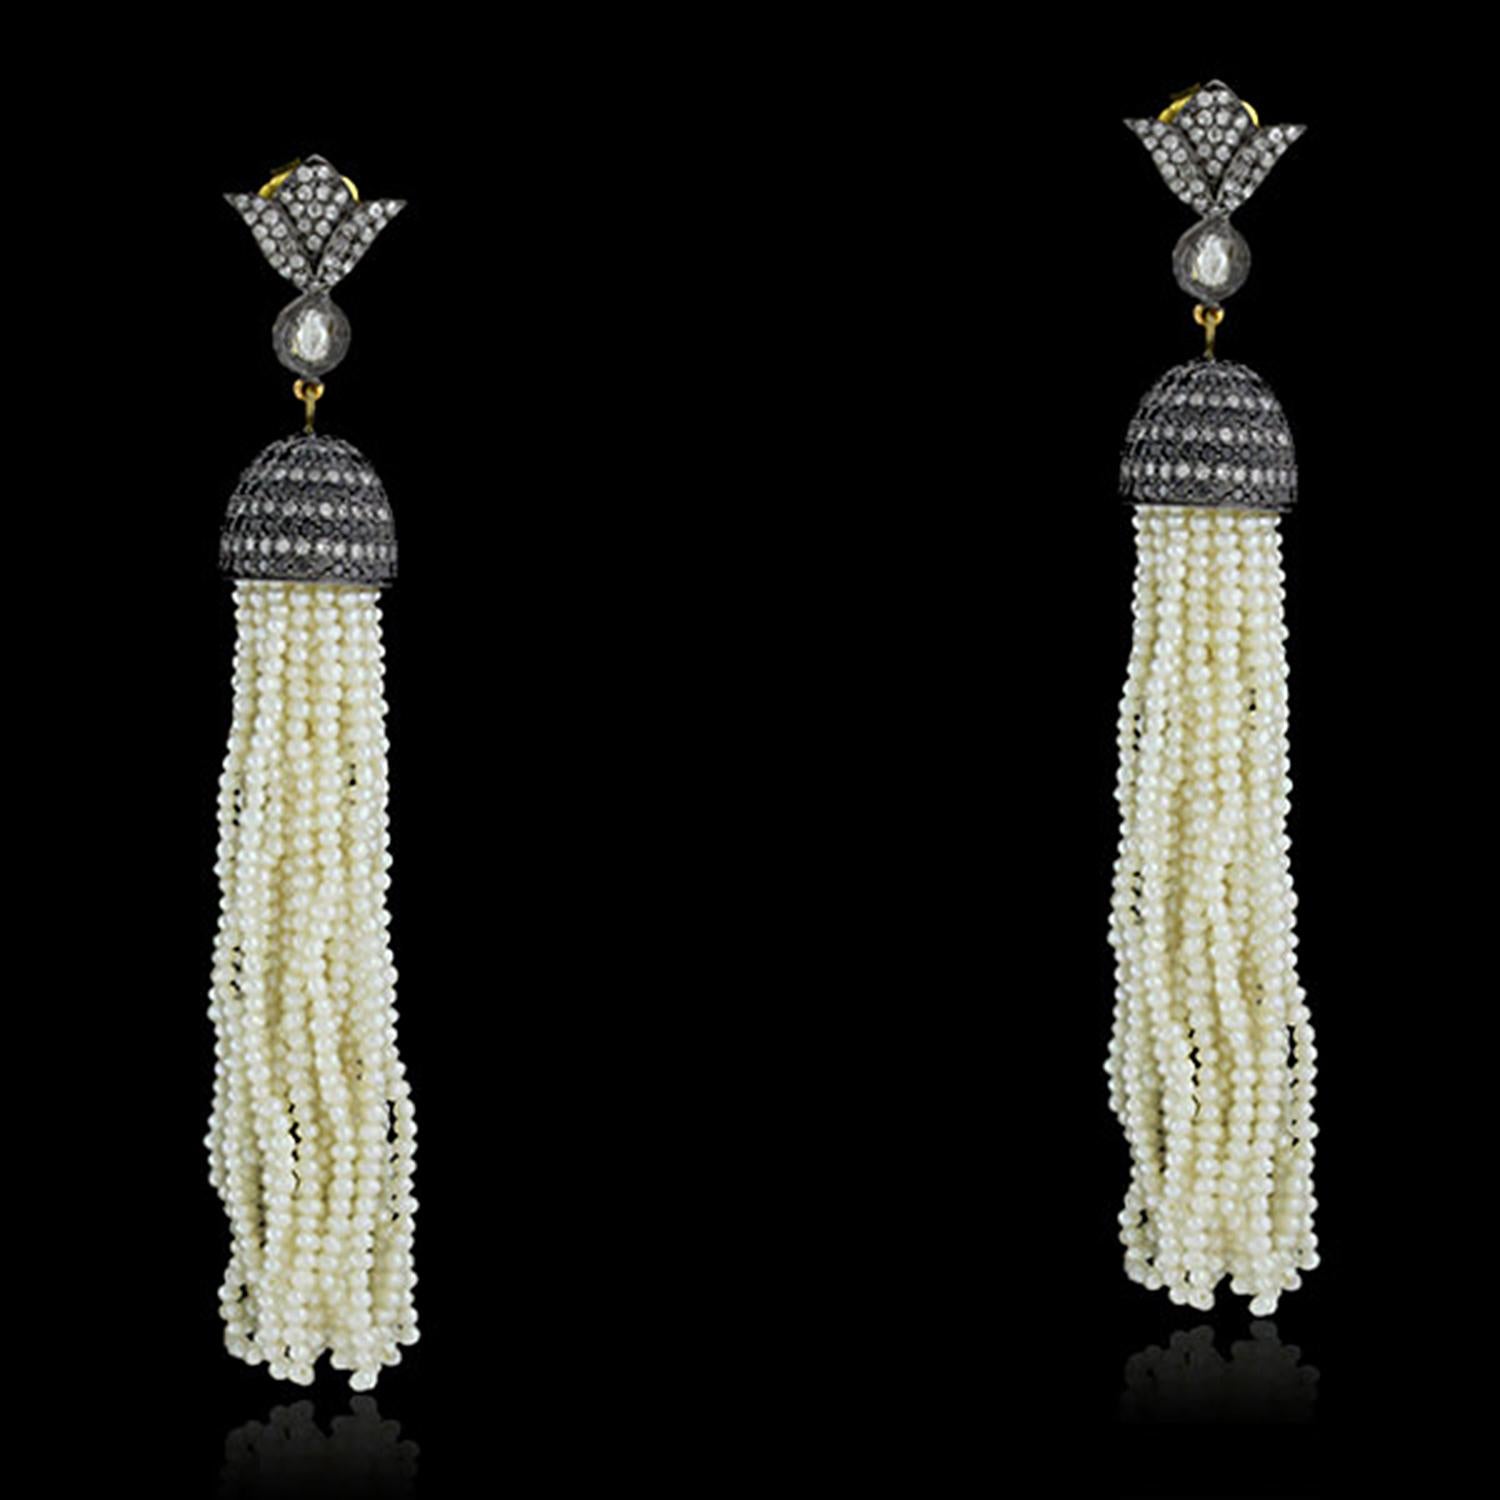 These stunning earrings are handcrafted with the finest materials. The 14k gold and silver setting holds a row of sparkling diamonds, which are encased in a delicate pave setting. The earrings are finished with a pair of lustrous pearls, adding a